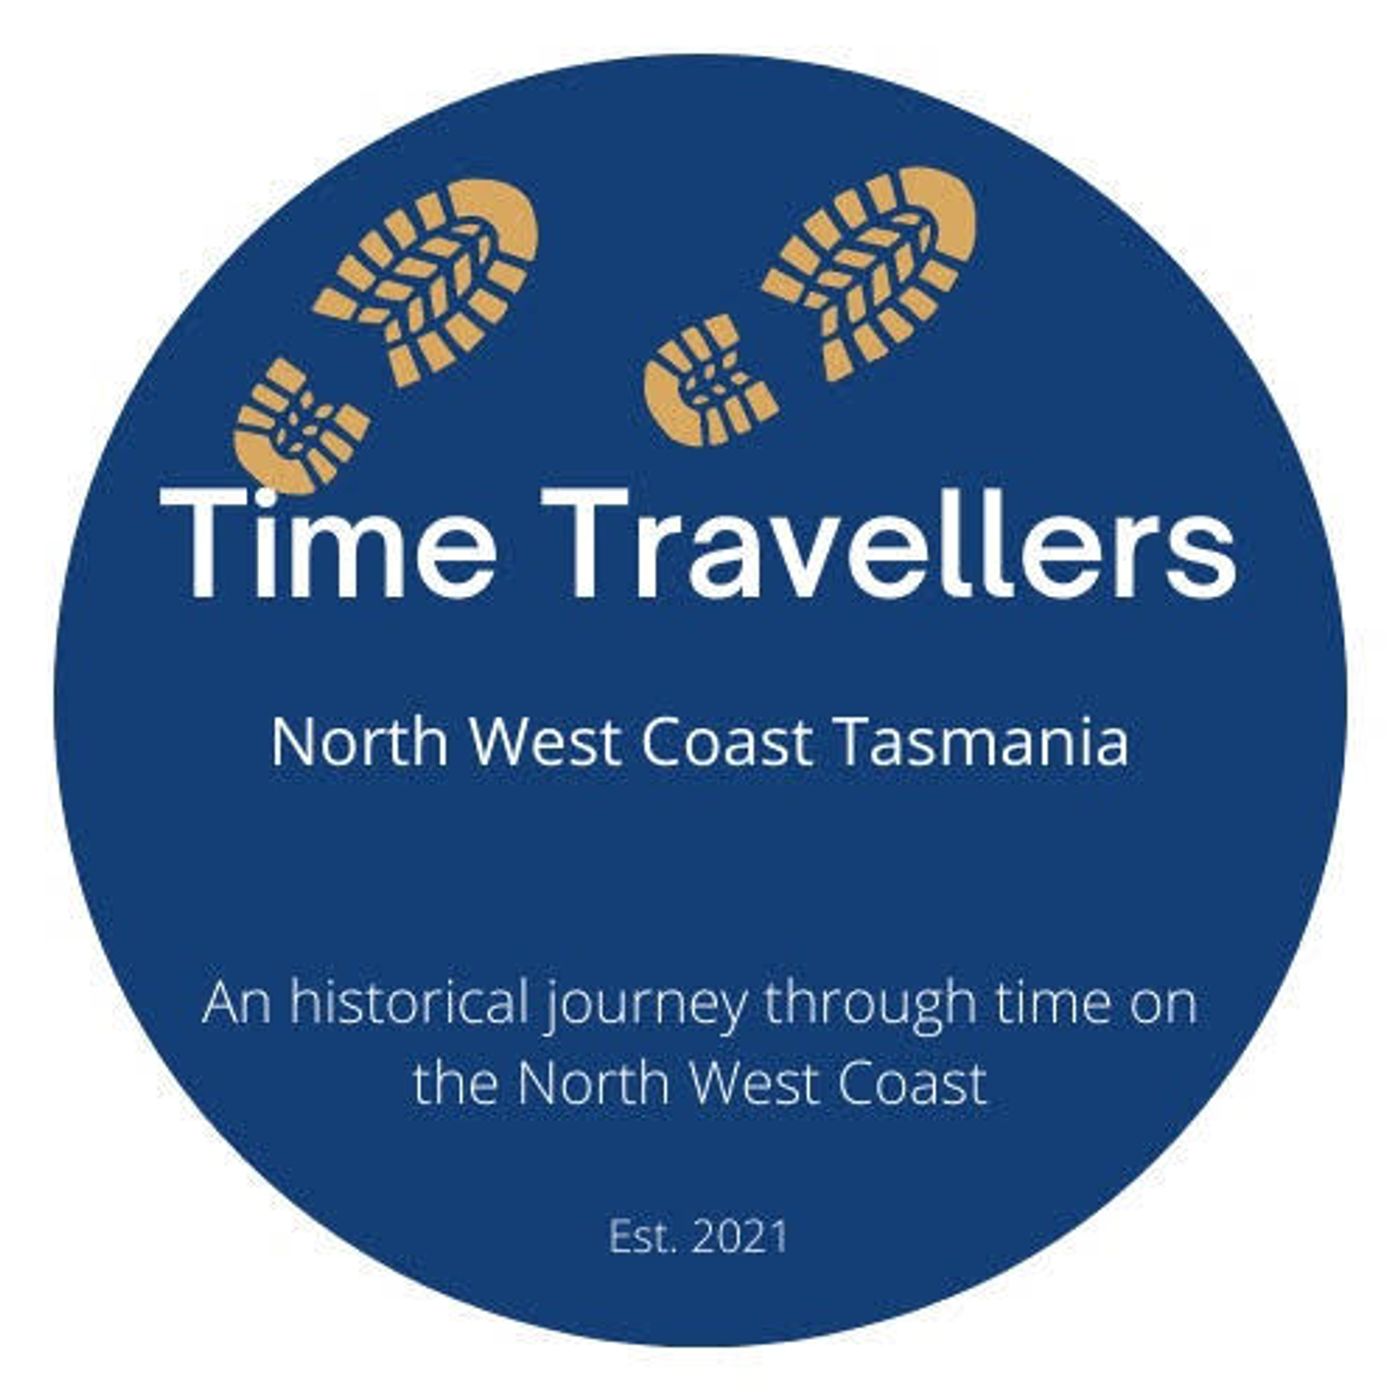 Time Travellers North West Coast